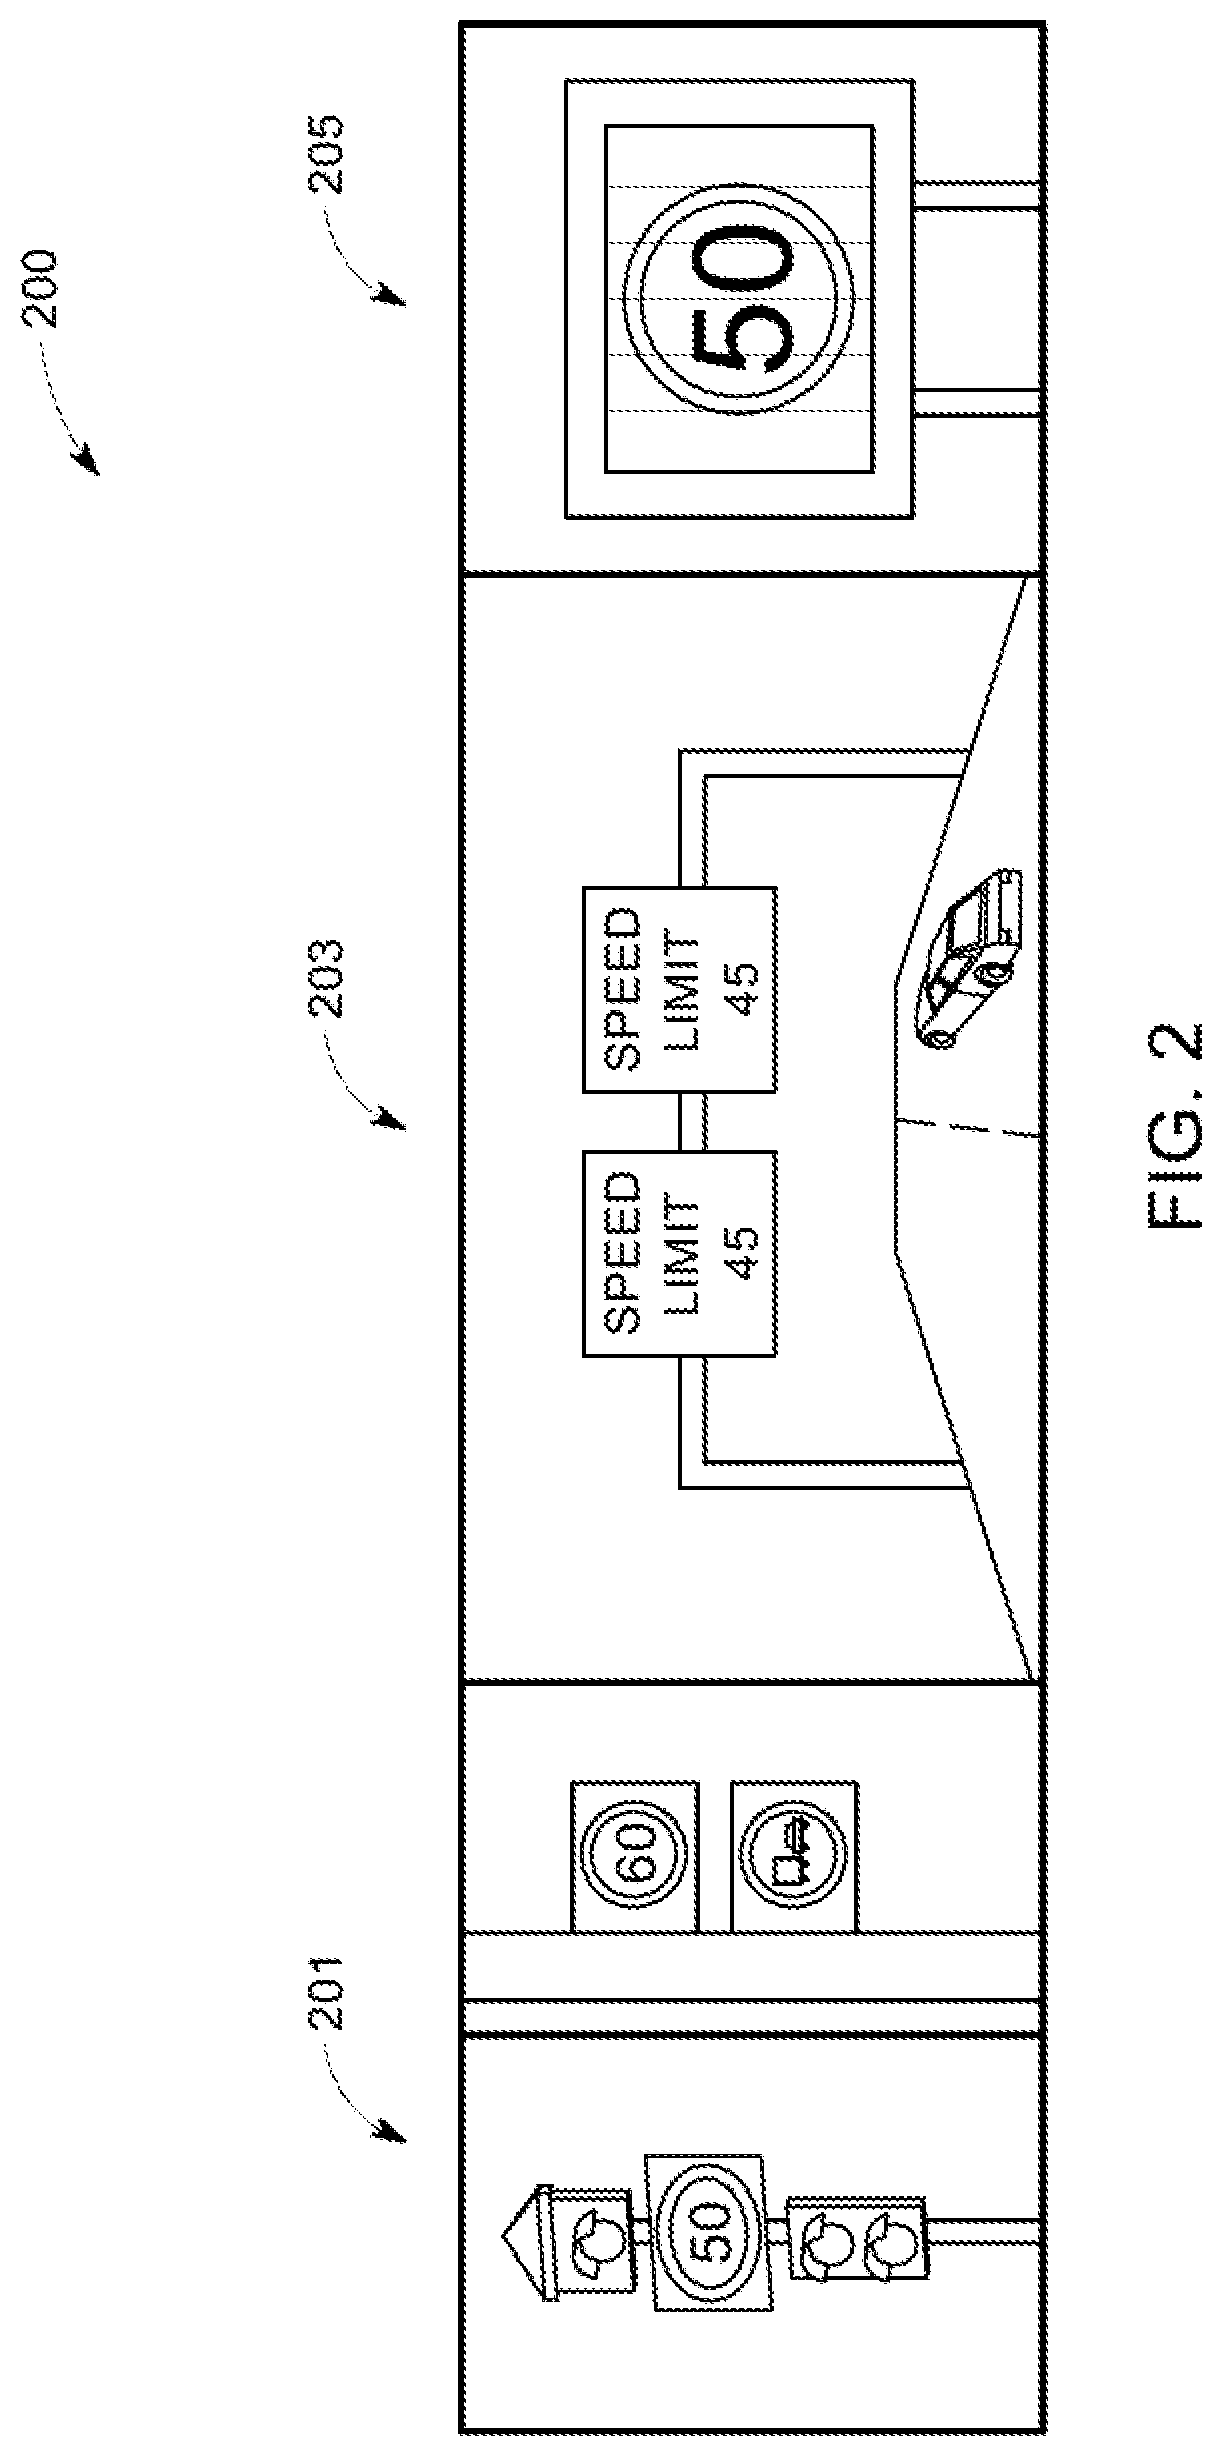 Method and system for supervised learning of road signs